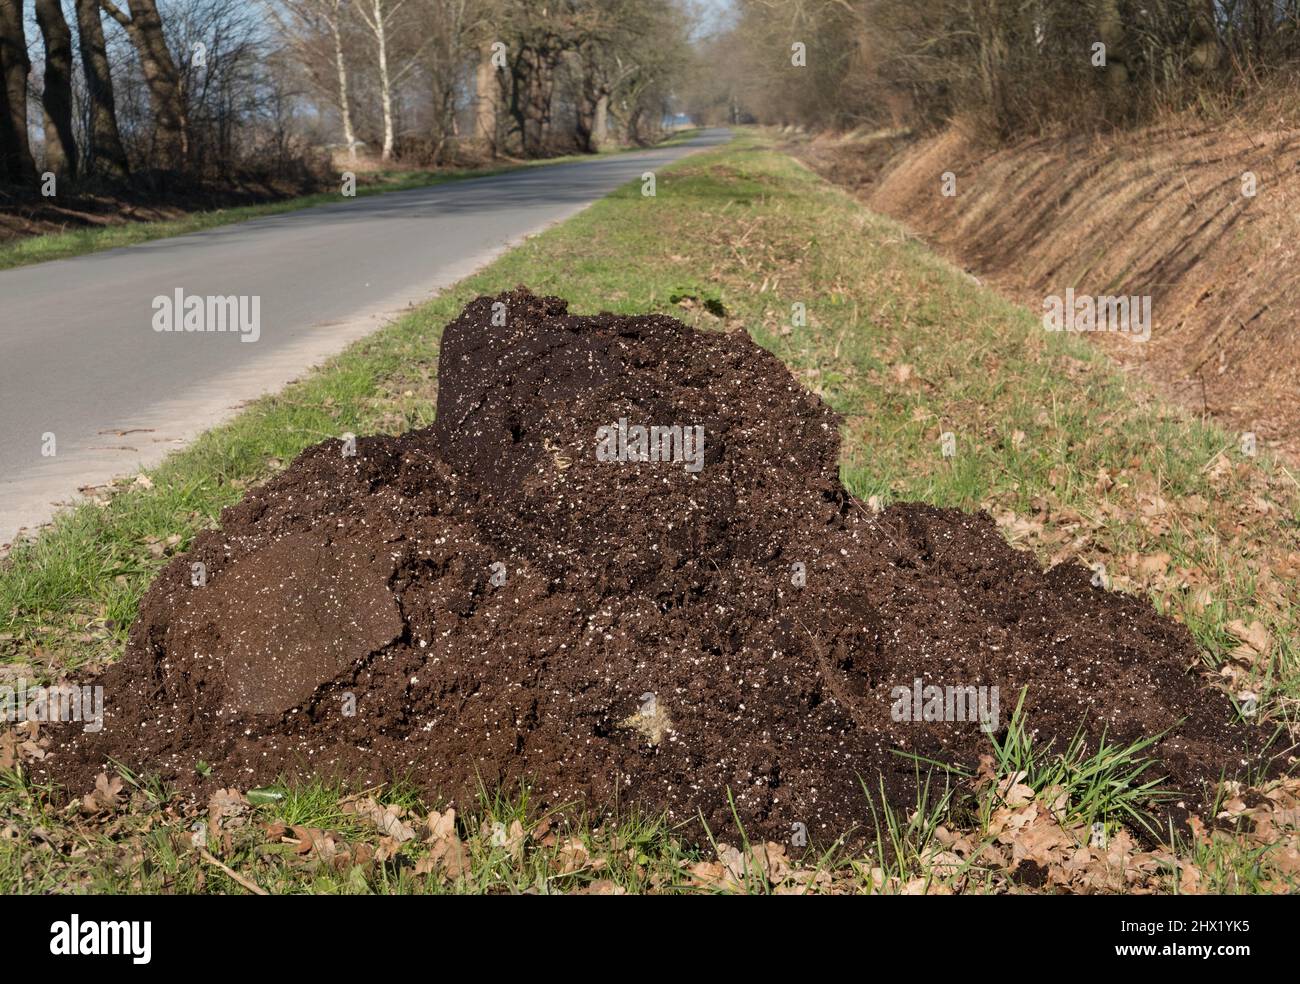 Heap of germination media with perlite, used in illegal hemp cultivation, dumped in the roadside Stock Photo